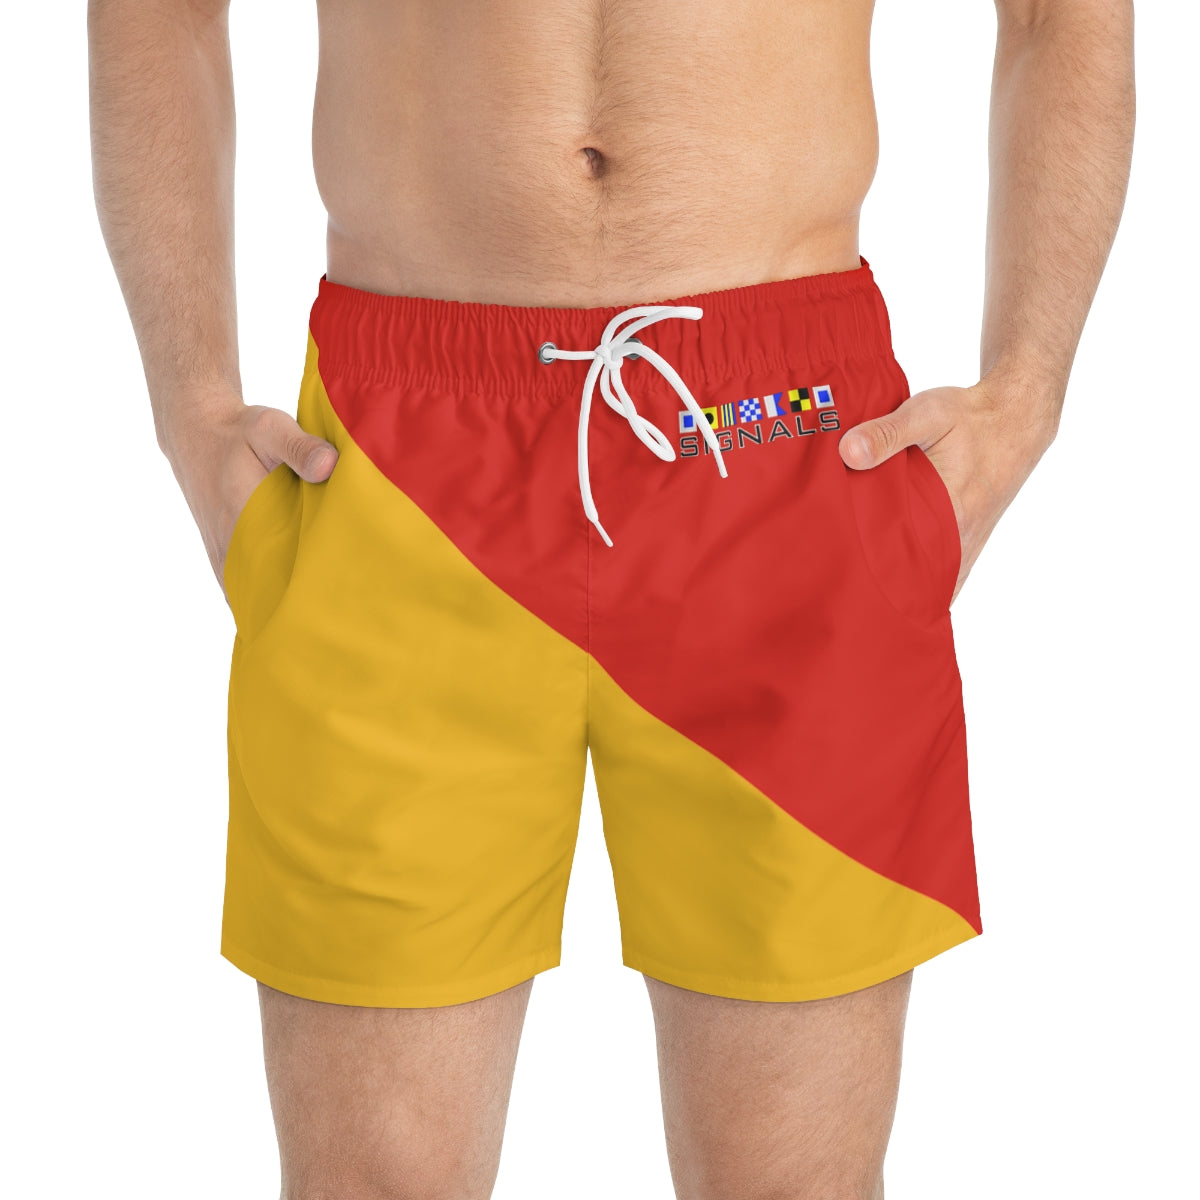 Signals Nautical Themed Swim Trunks - Man Overboard